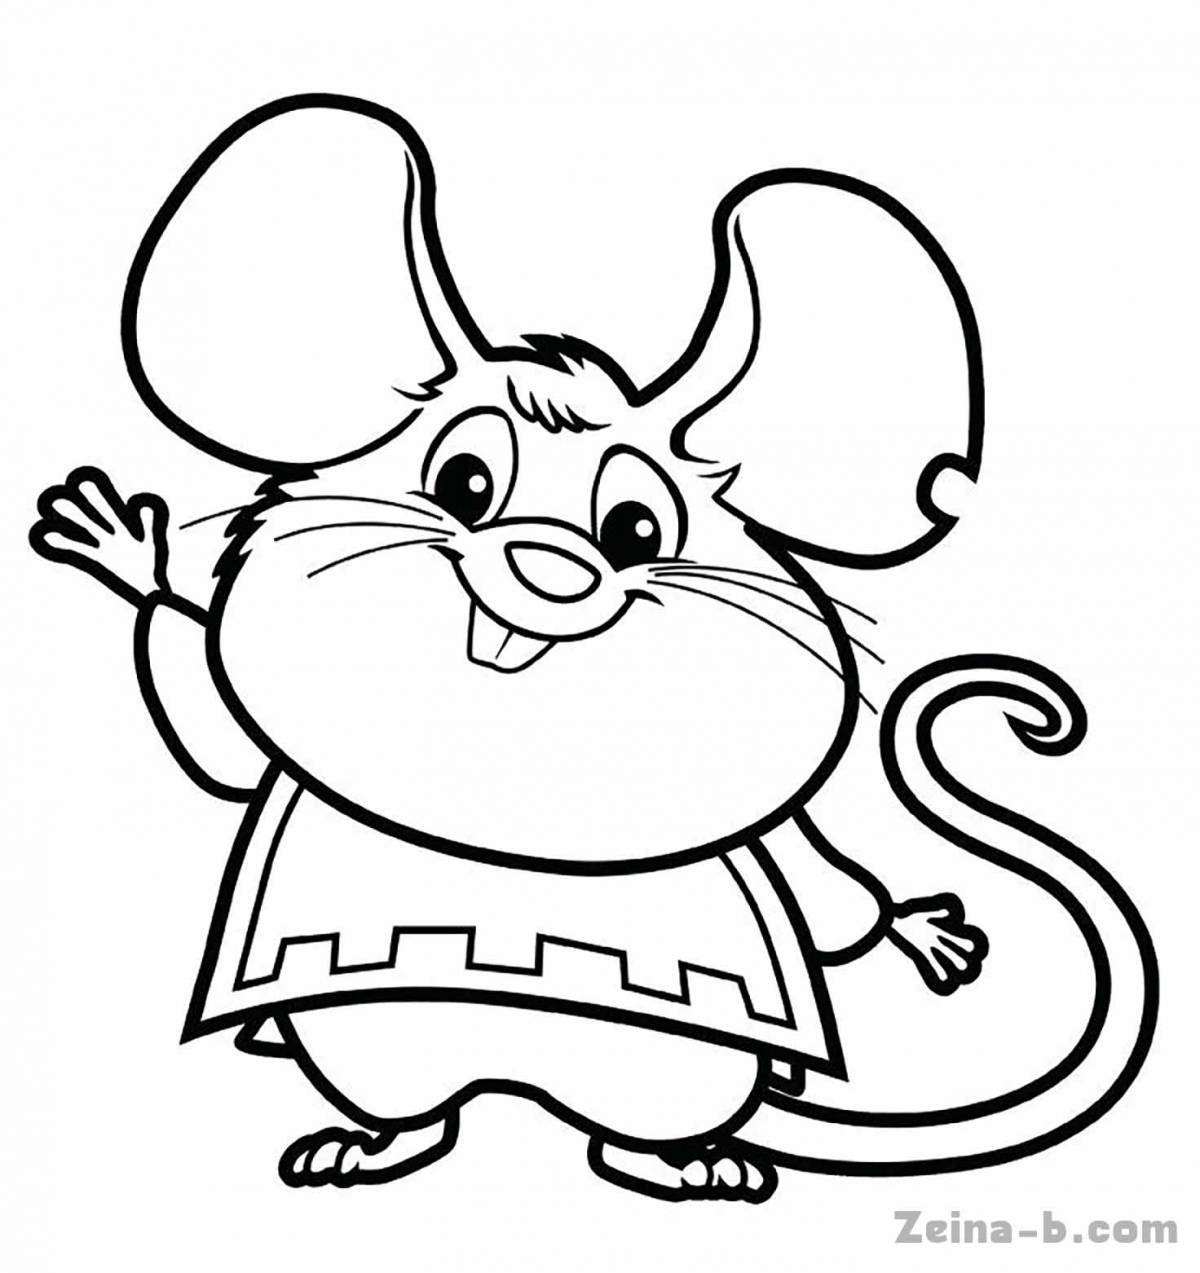 Splendid mouse coloring pages for kids